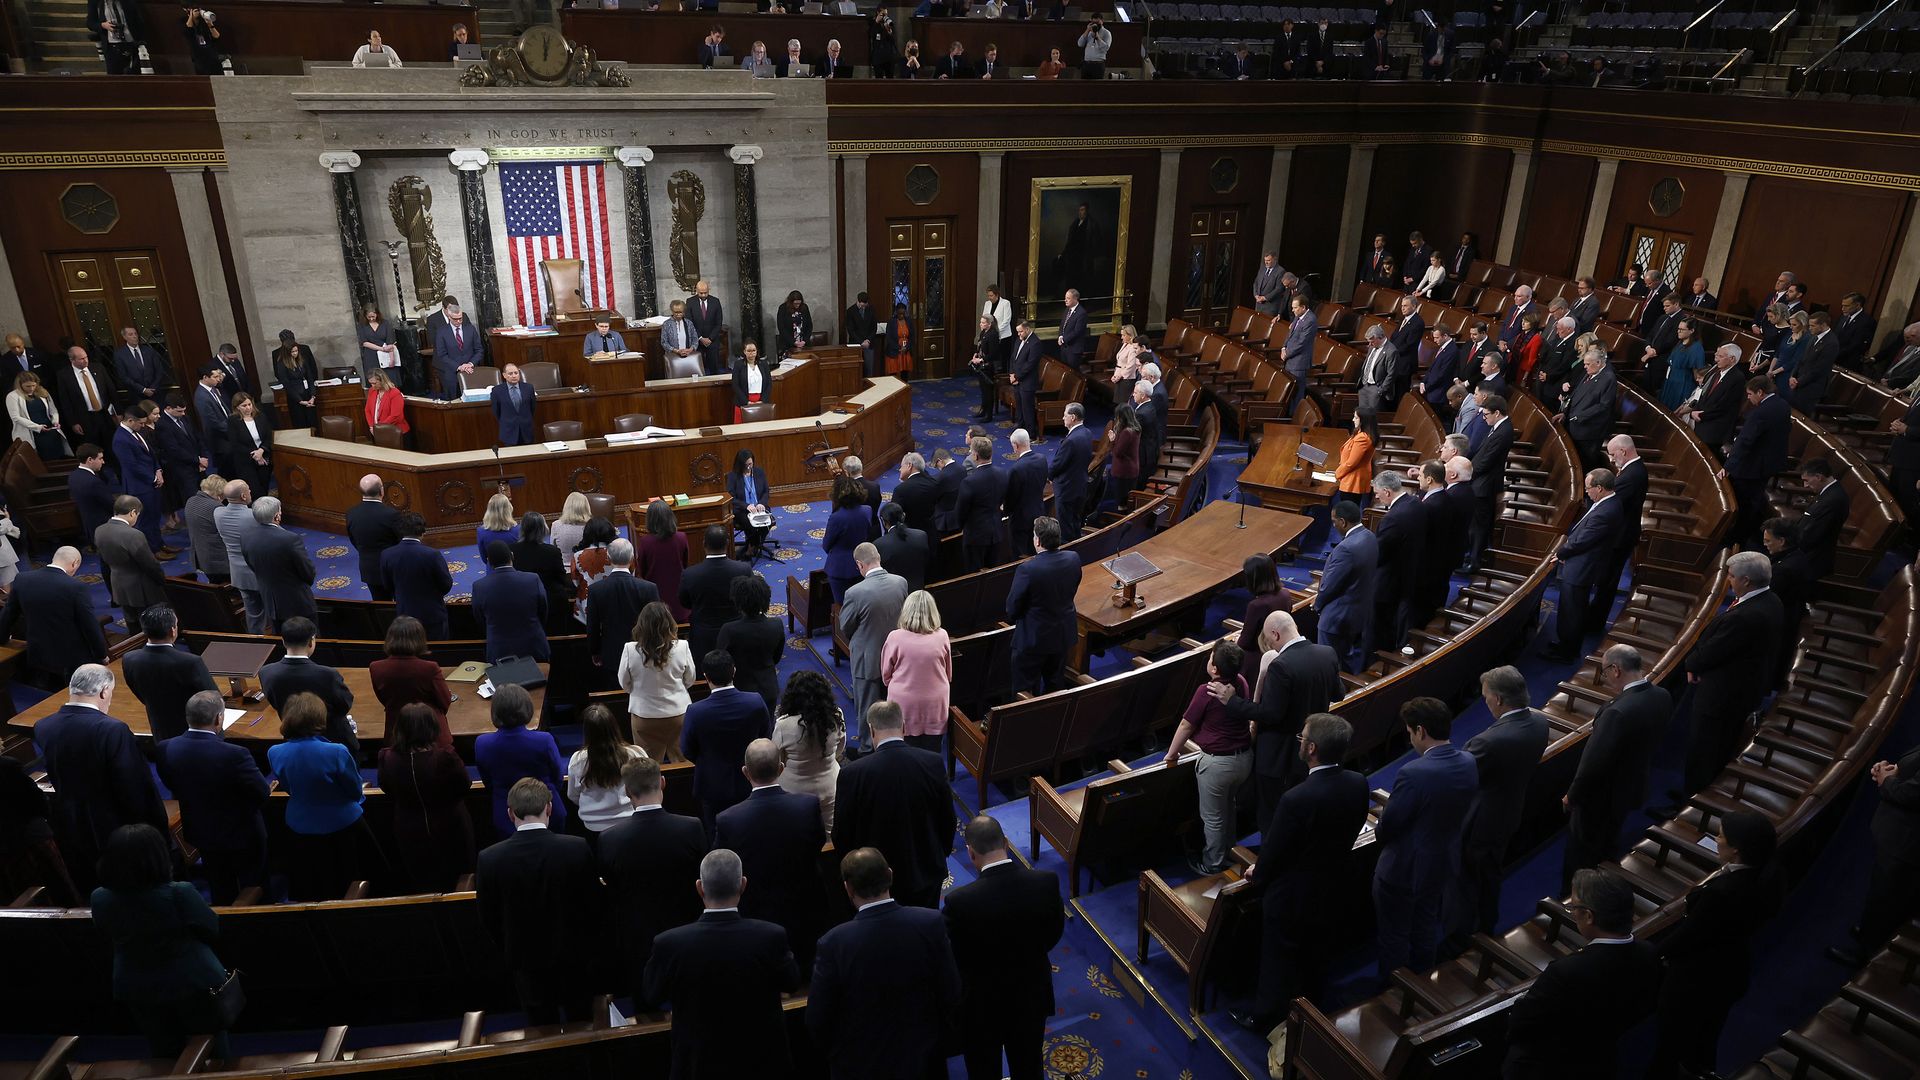 The House of Representatives convenes for the second day of elections for Speaker of the House at the U.S. Capitol Building on January 04, 2023 in Washington, DC.